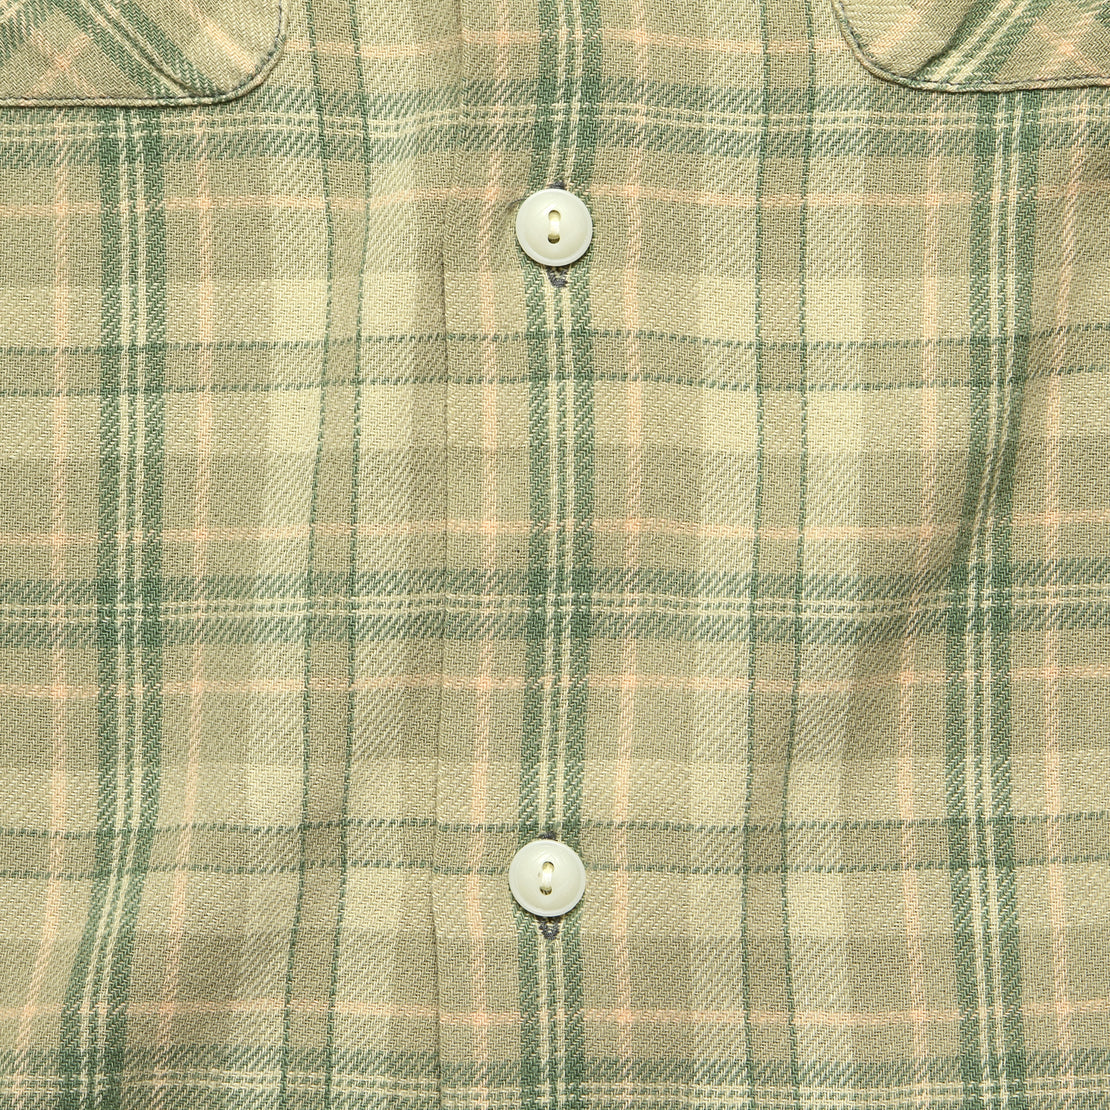 Carter Camp Shirt - Sage/Tan - RRL - STAG Provisions - Tops - L/S Woven - Plaid